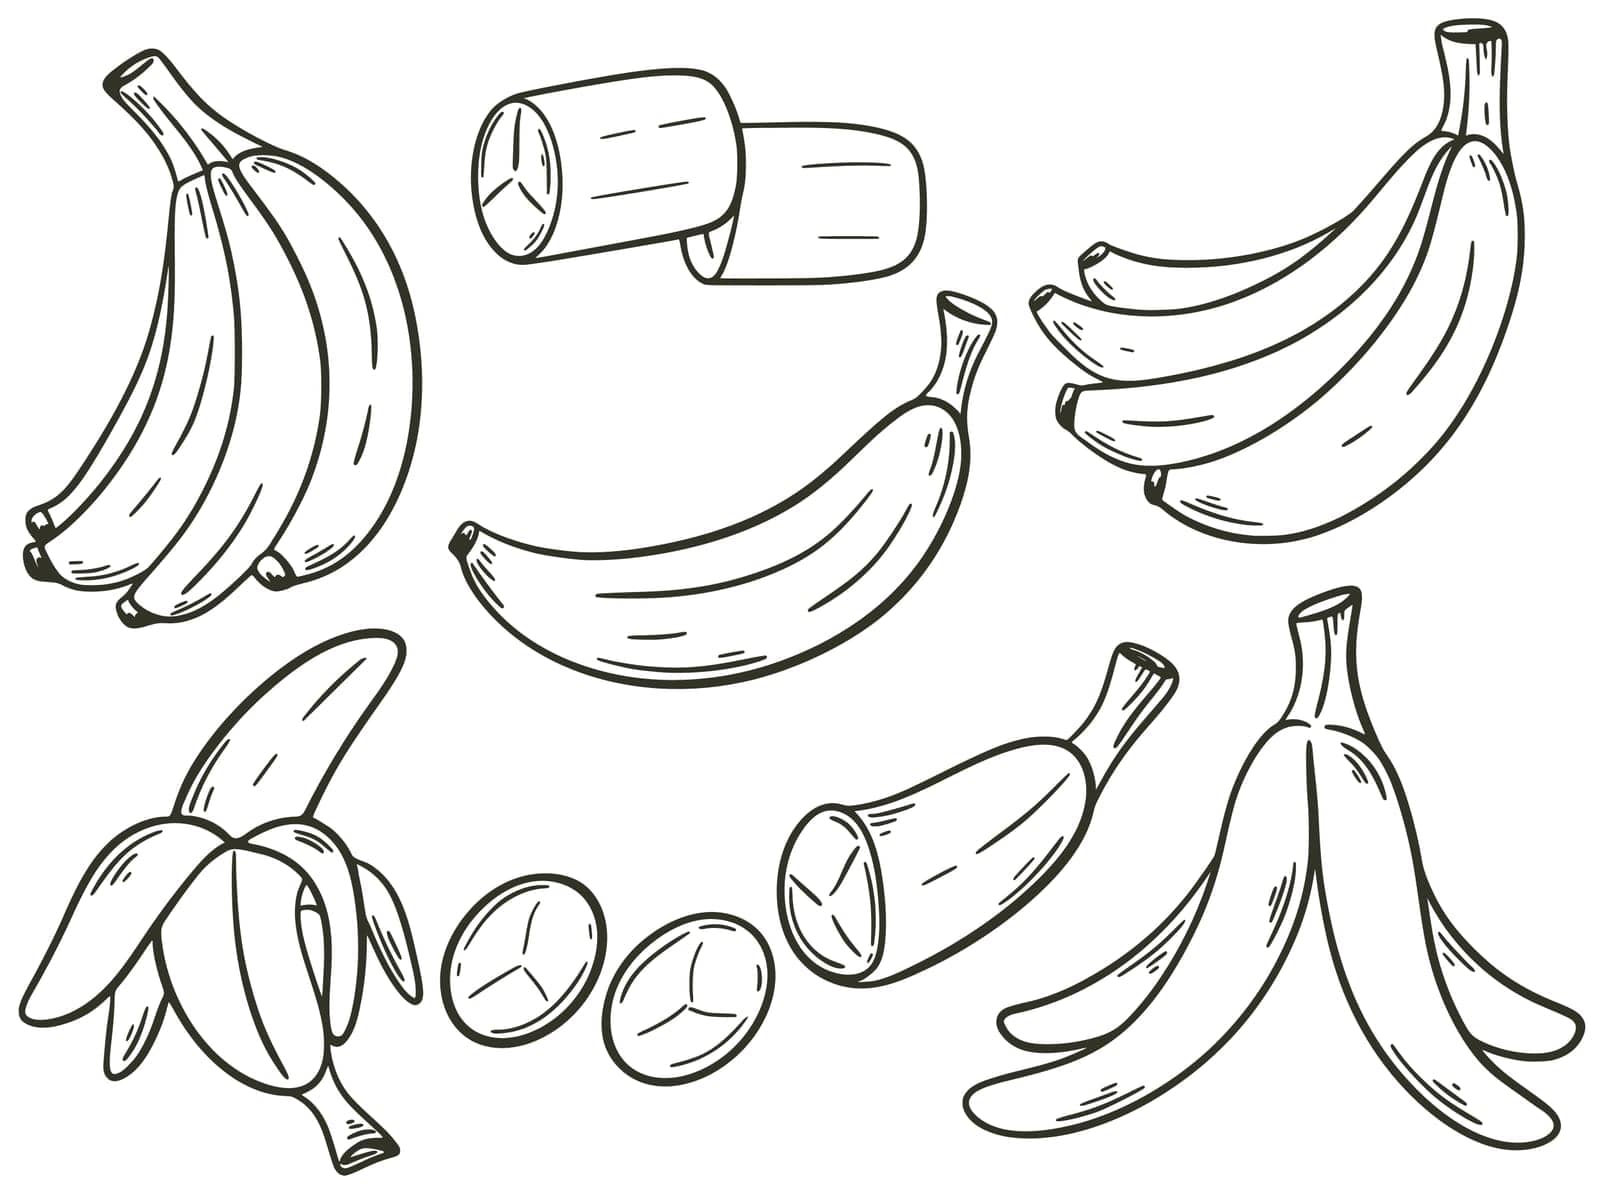 Bananas set hand engraving isolated vector illustration. Sketch of banana in bunch, single, peeled, sliced. Organic healthy food black line on white background. Tropical fruit doodle style